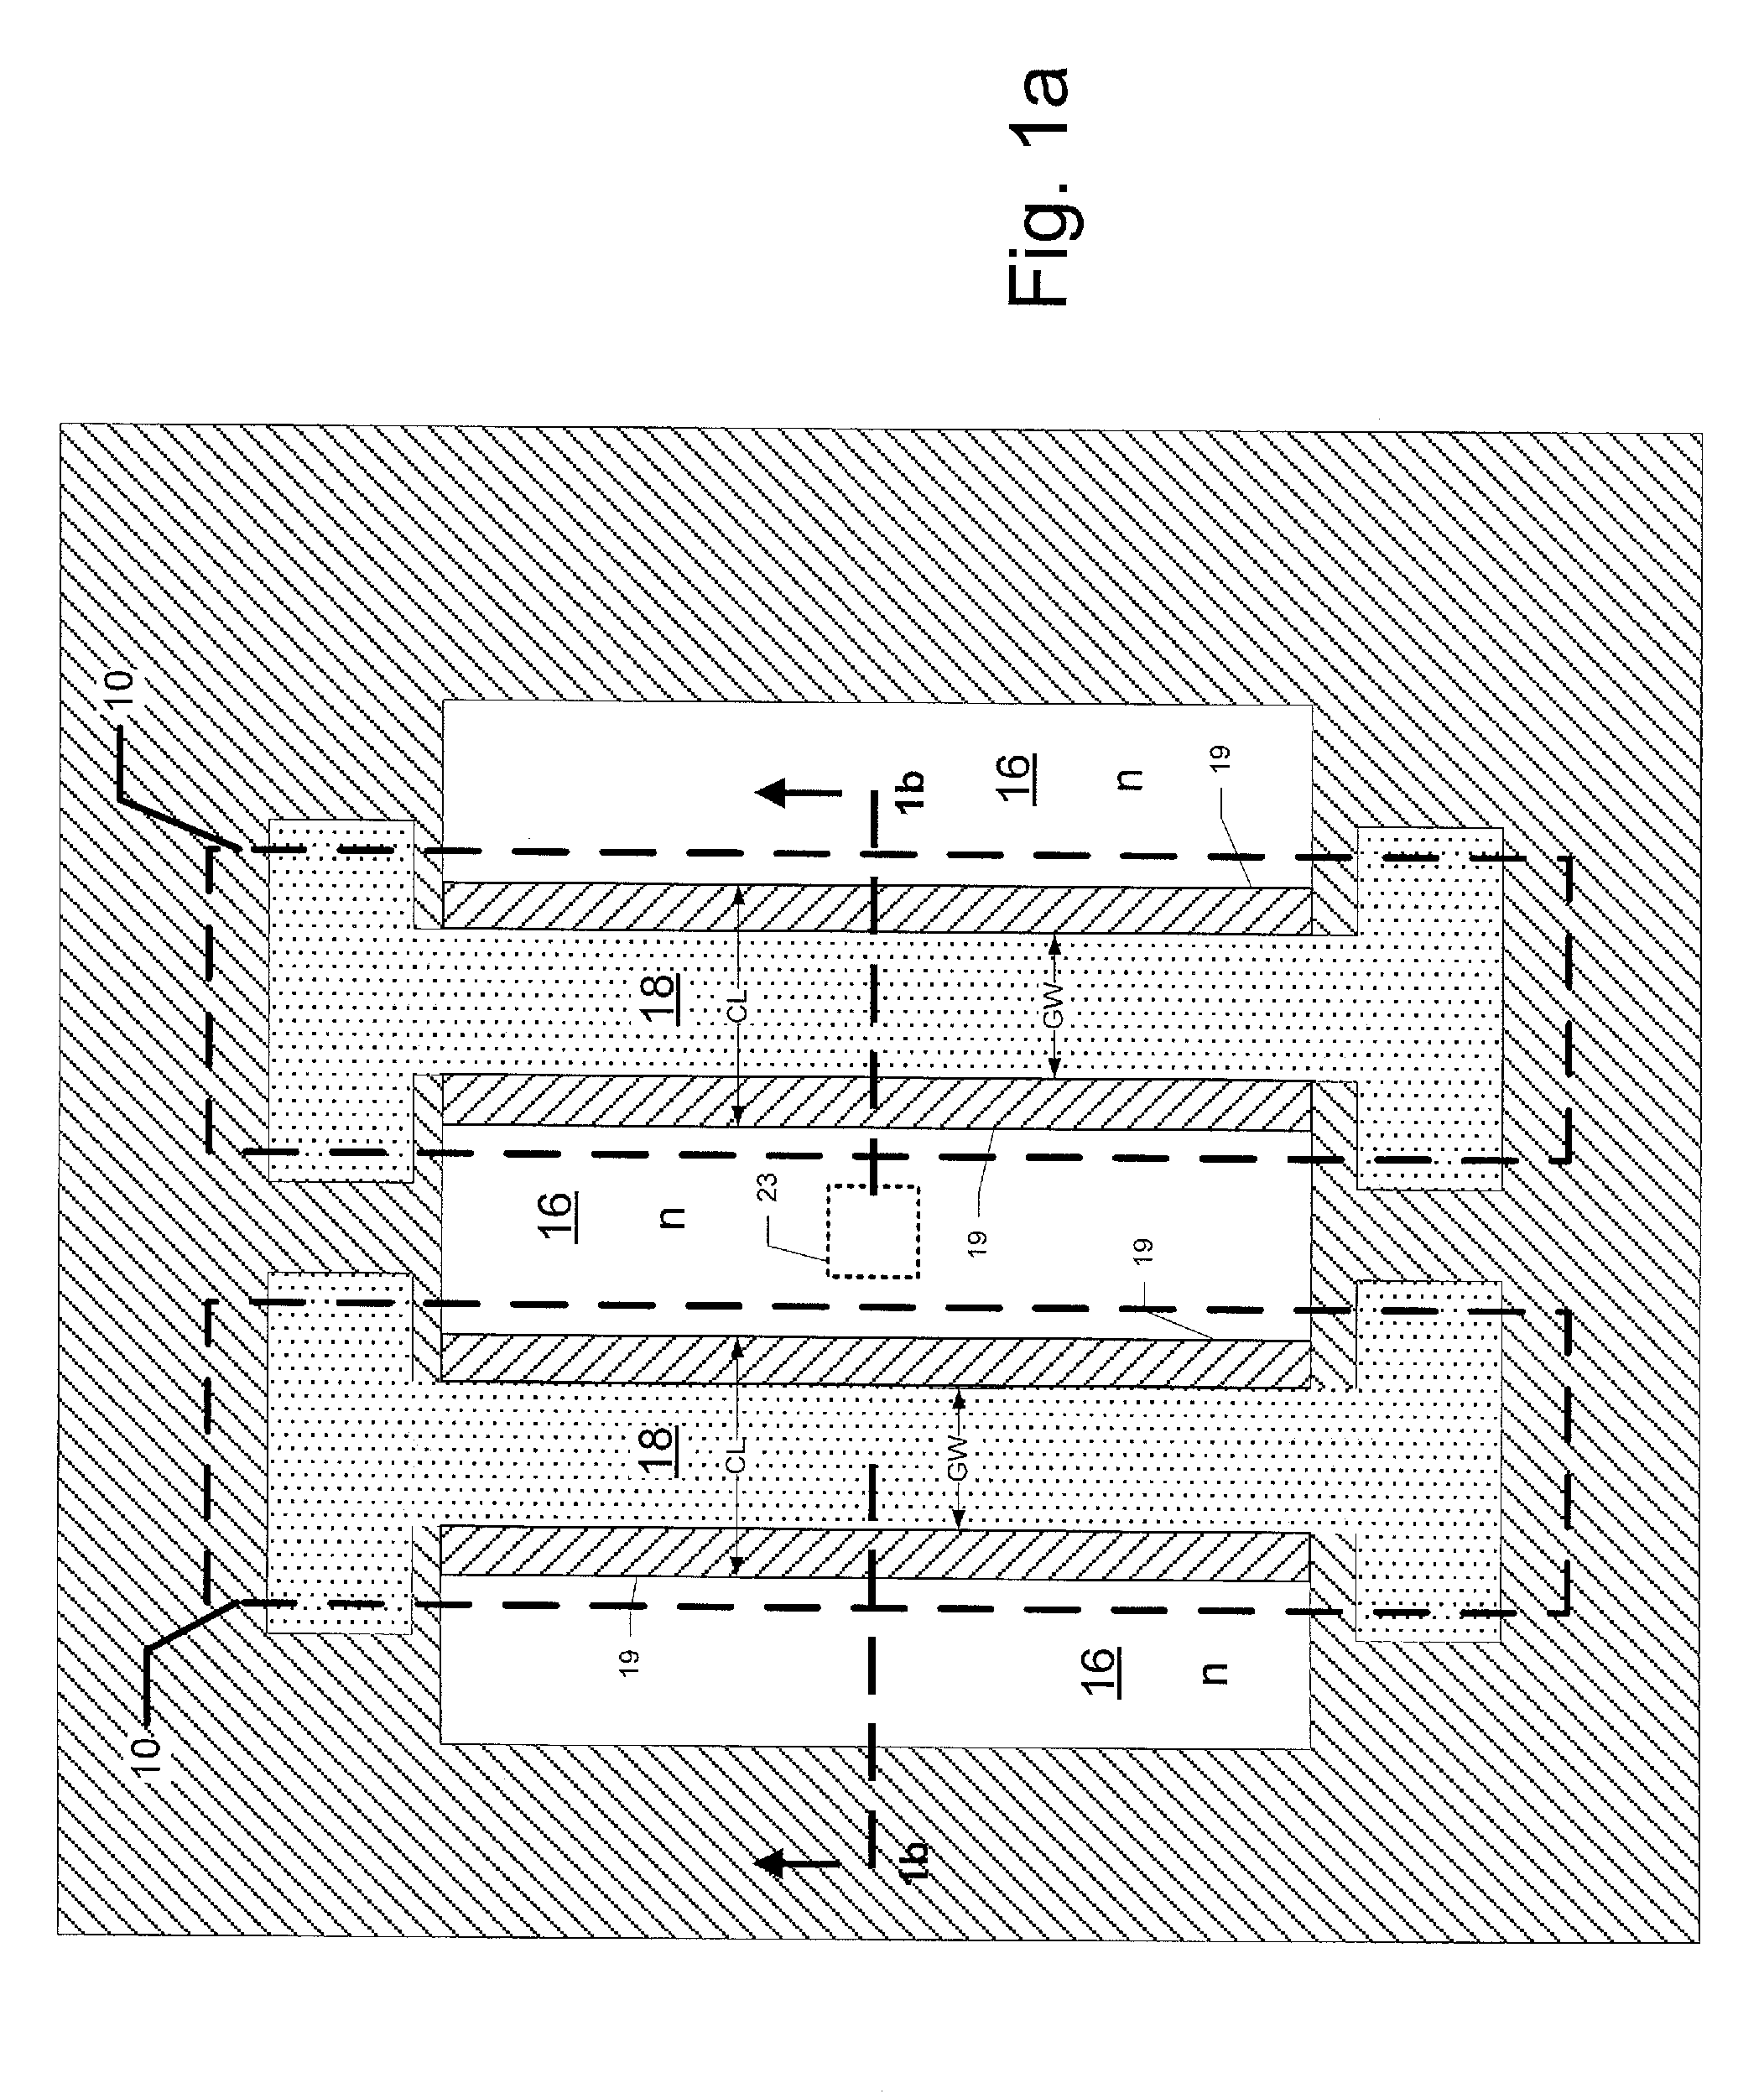 Recessed Channel Insulated-Gate Field Effect Transistor with Self-Aligned Gate and Increased Channel Length